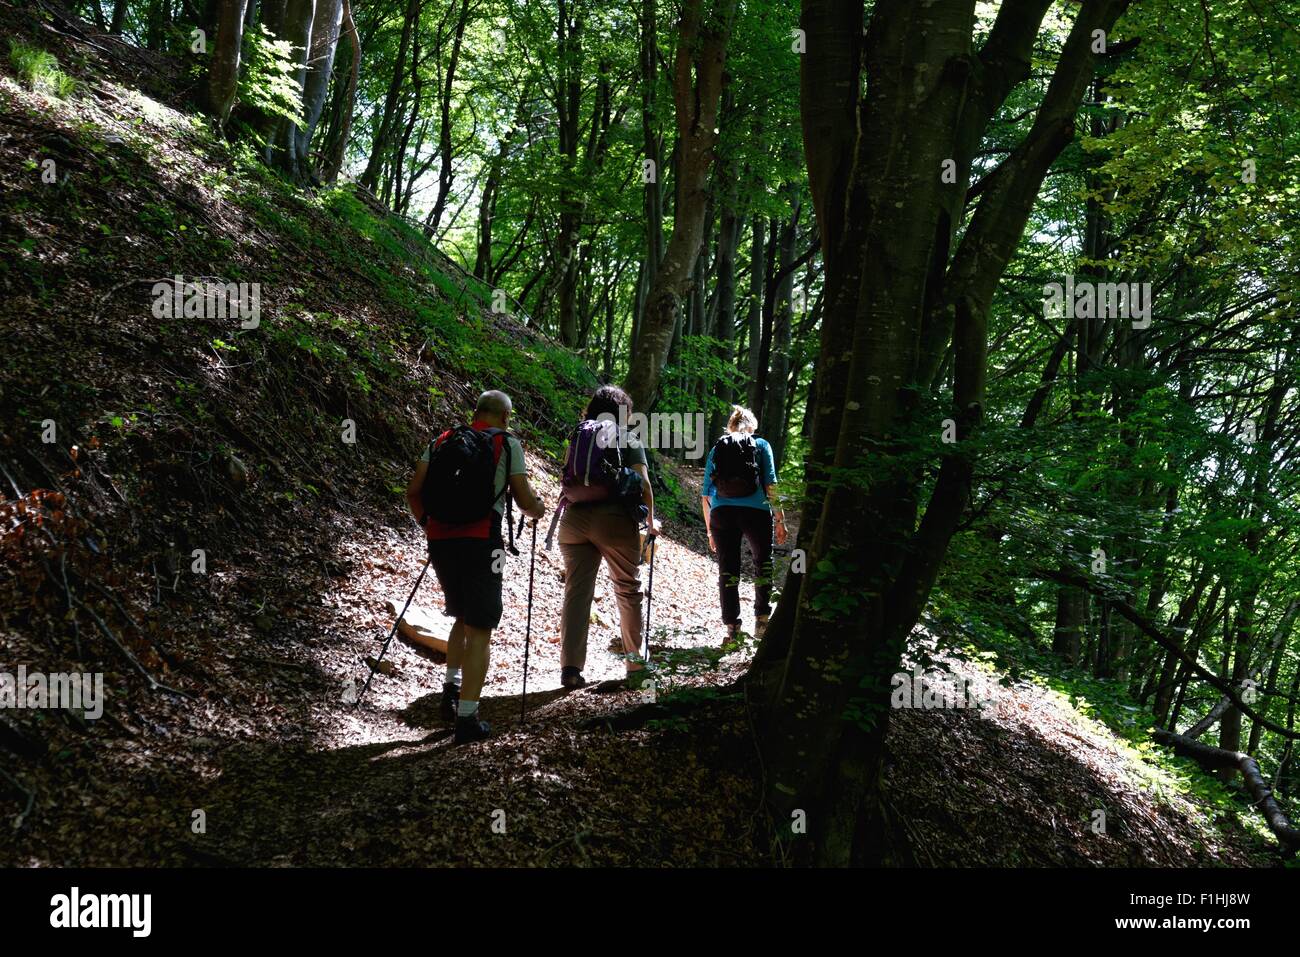 Rear view of mature male and female hikers hiking through forest Stock Photo